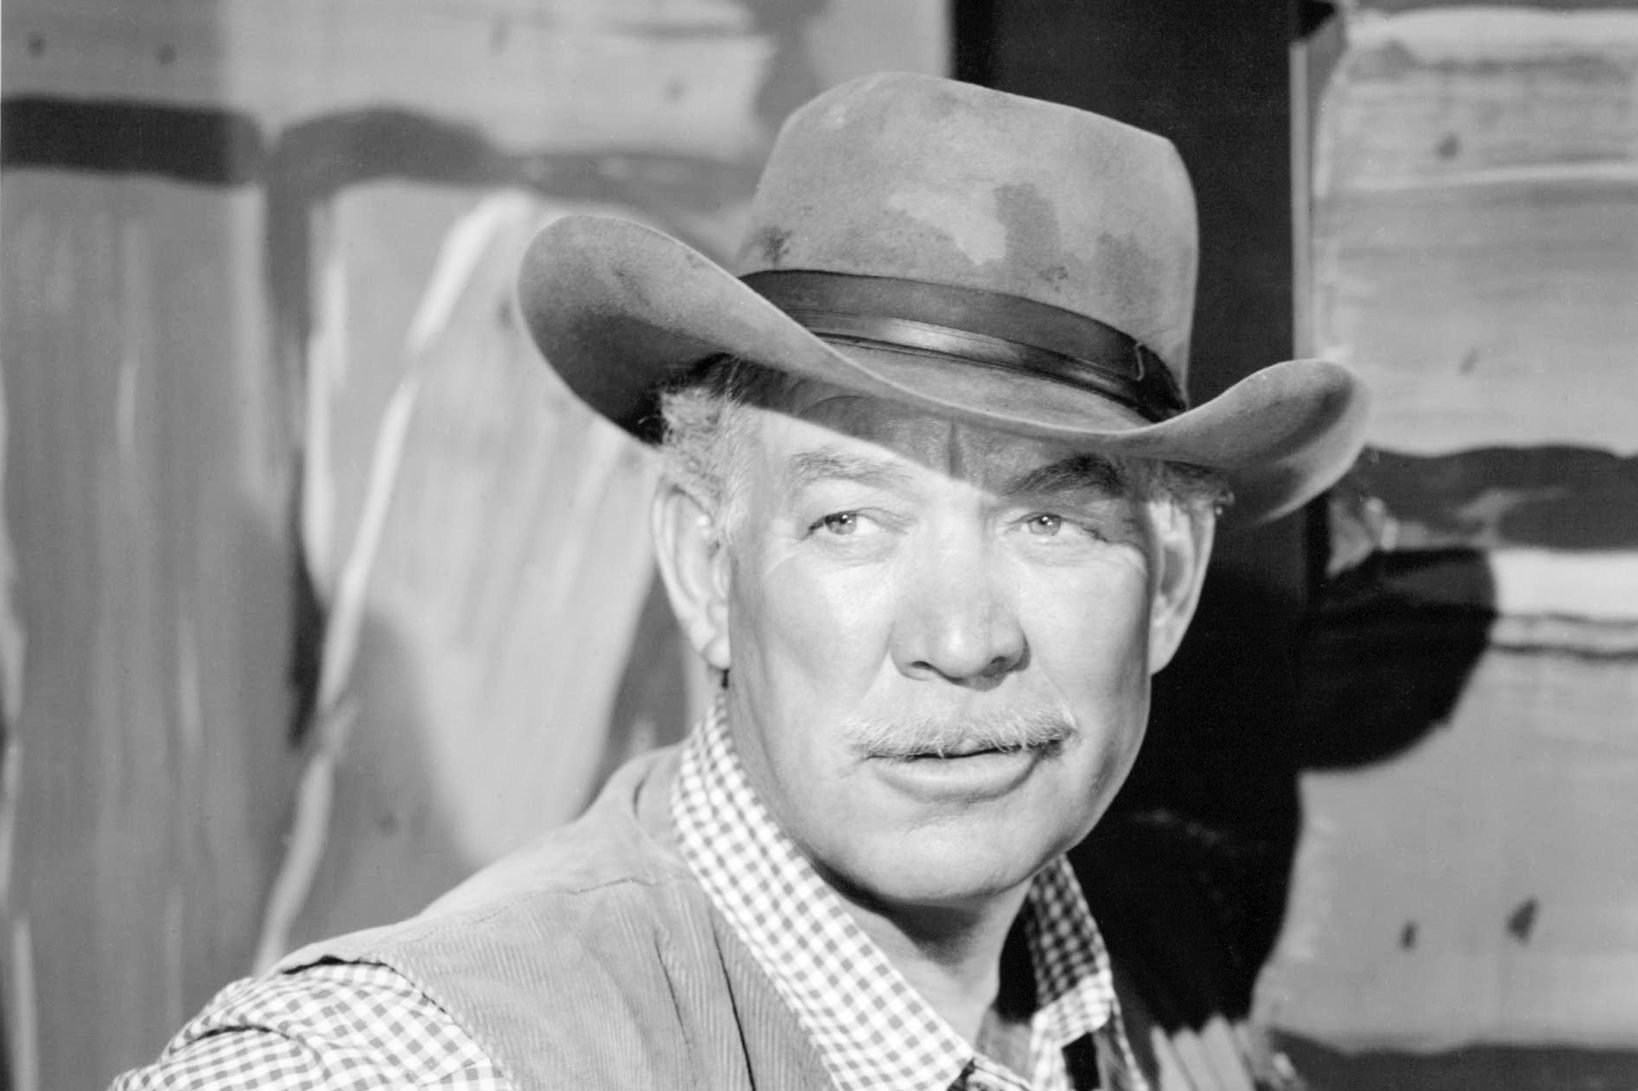 Ward Bond played the role of Sergeant Major Michael O'Rourke